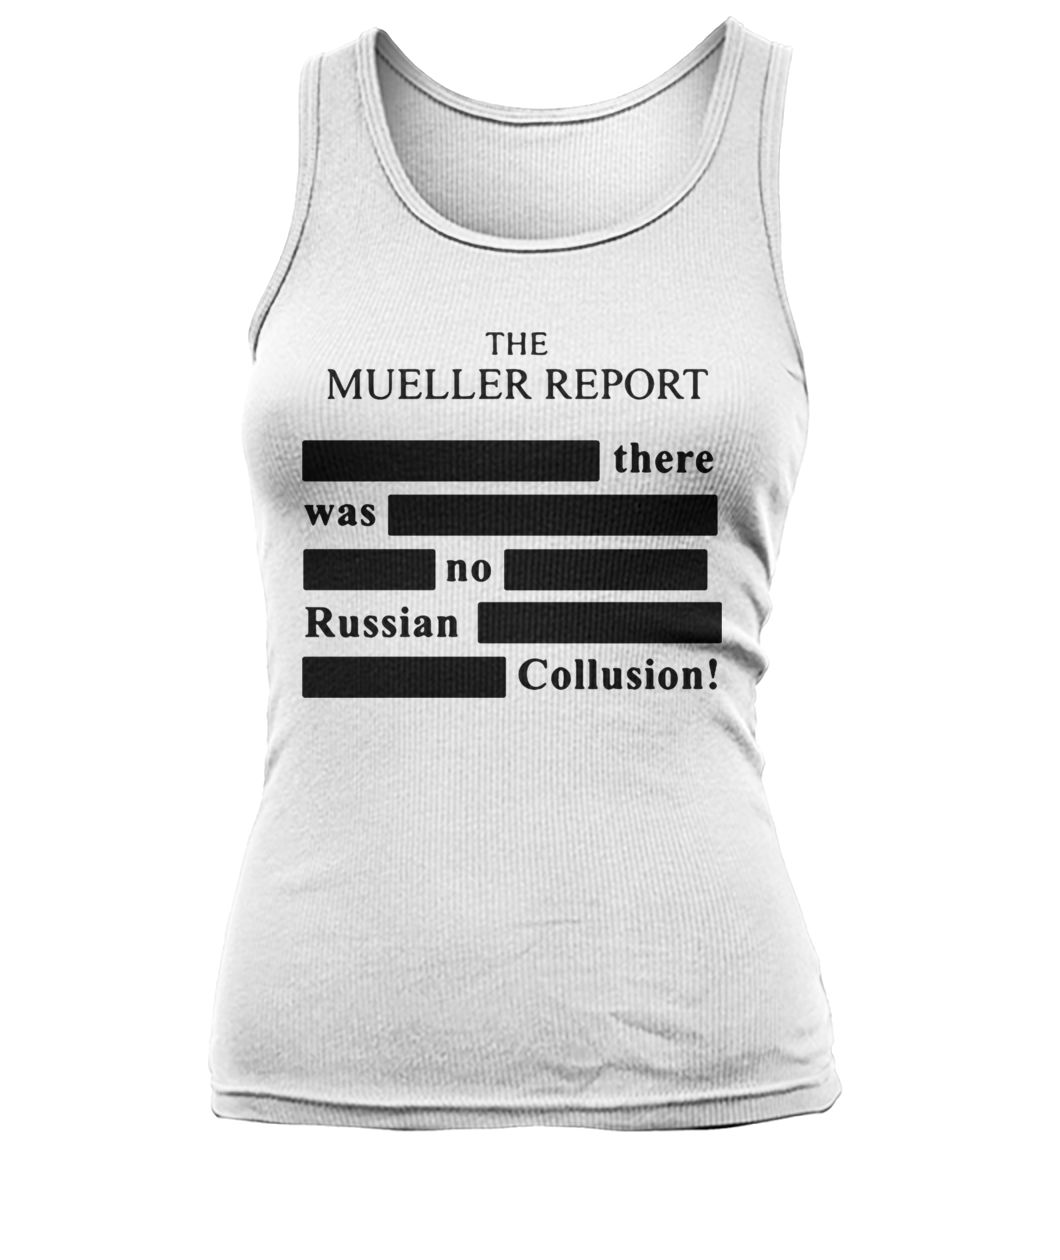 The mueller report there was no russian collusion women's tank top